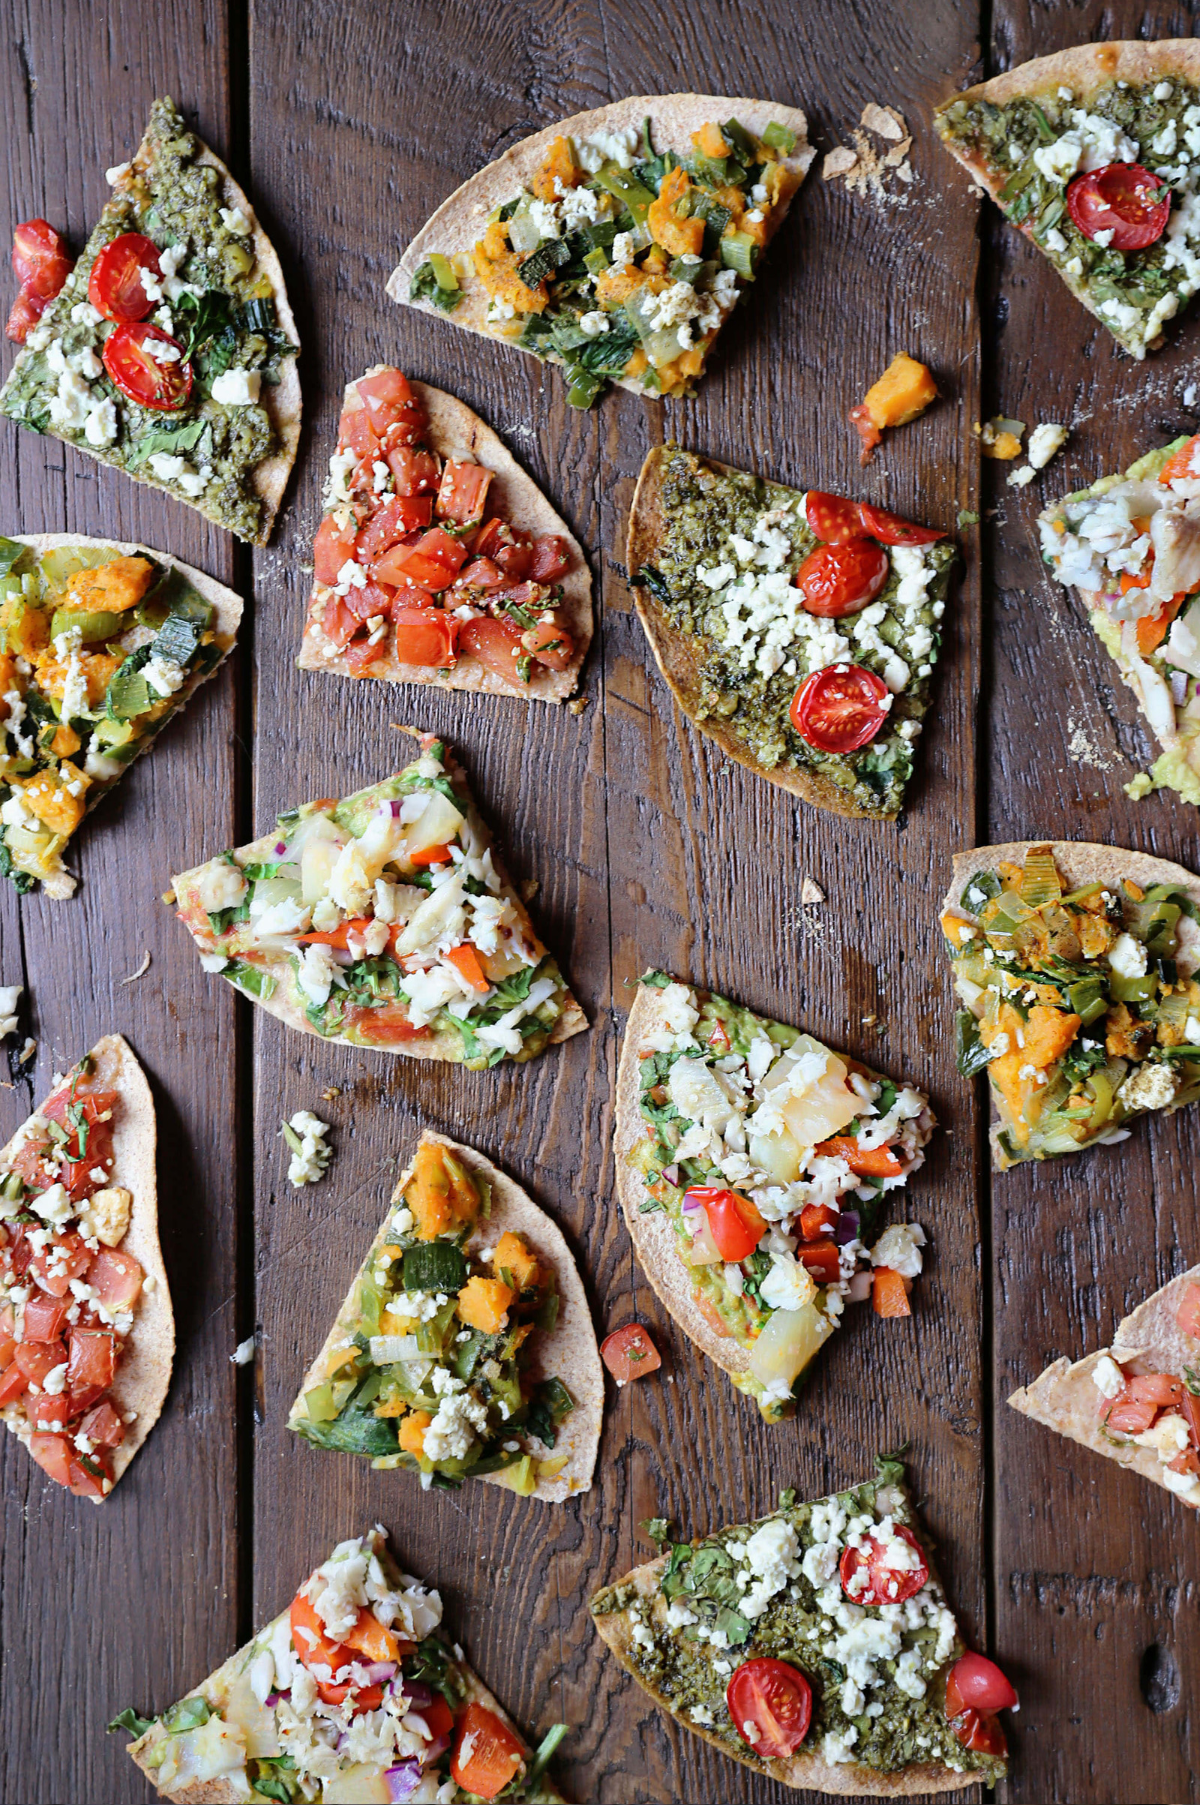 Tortilla Pizza Roundup That Your Clients Will Love